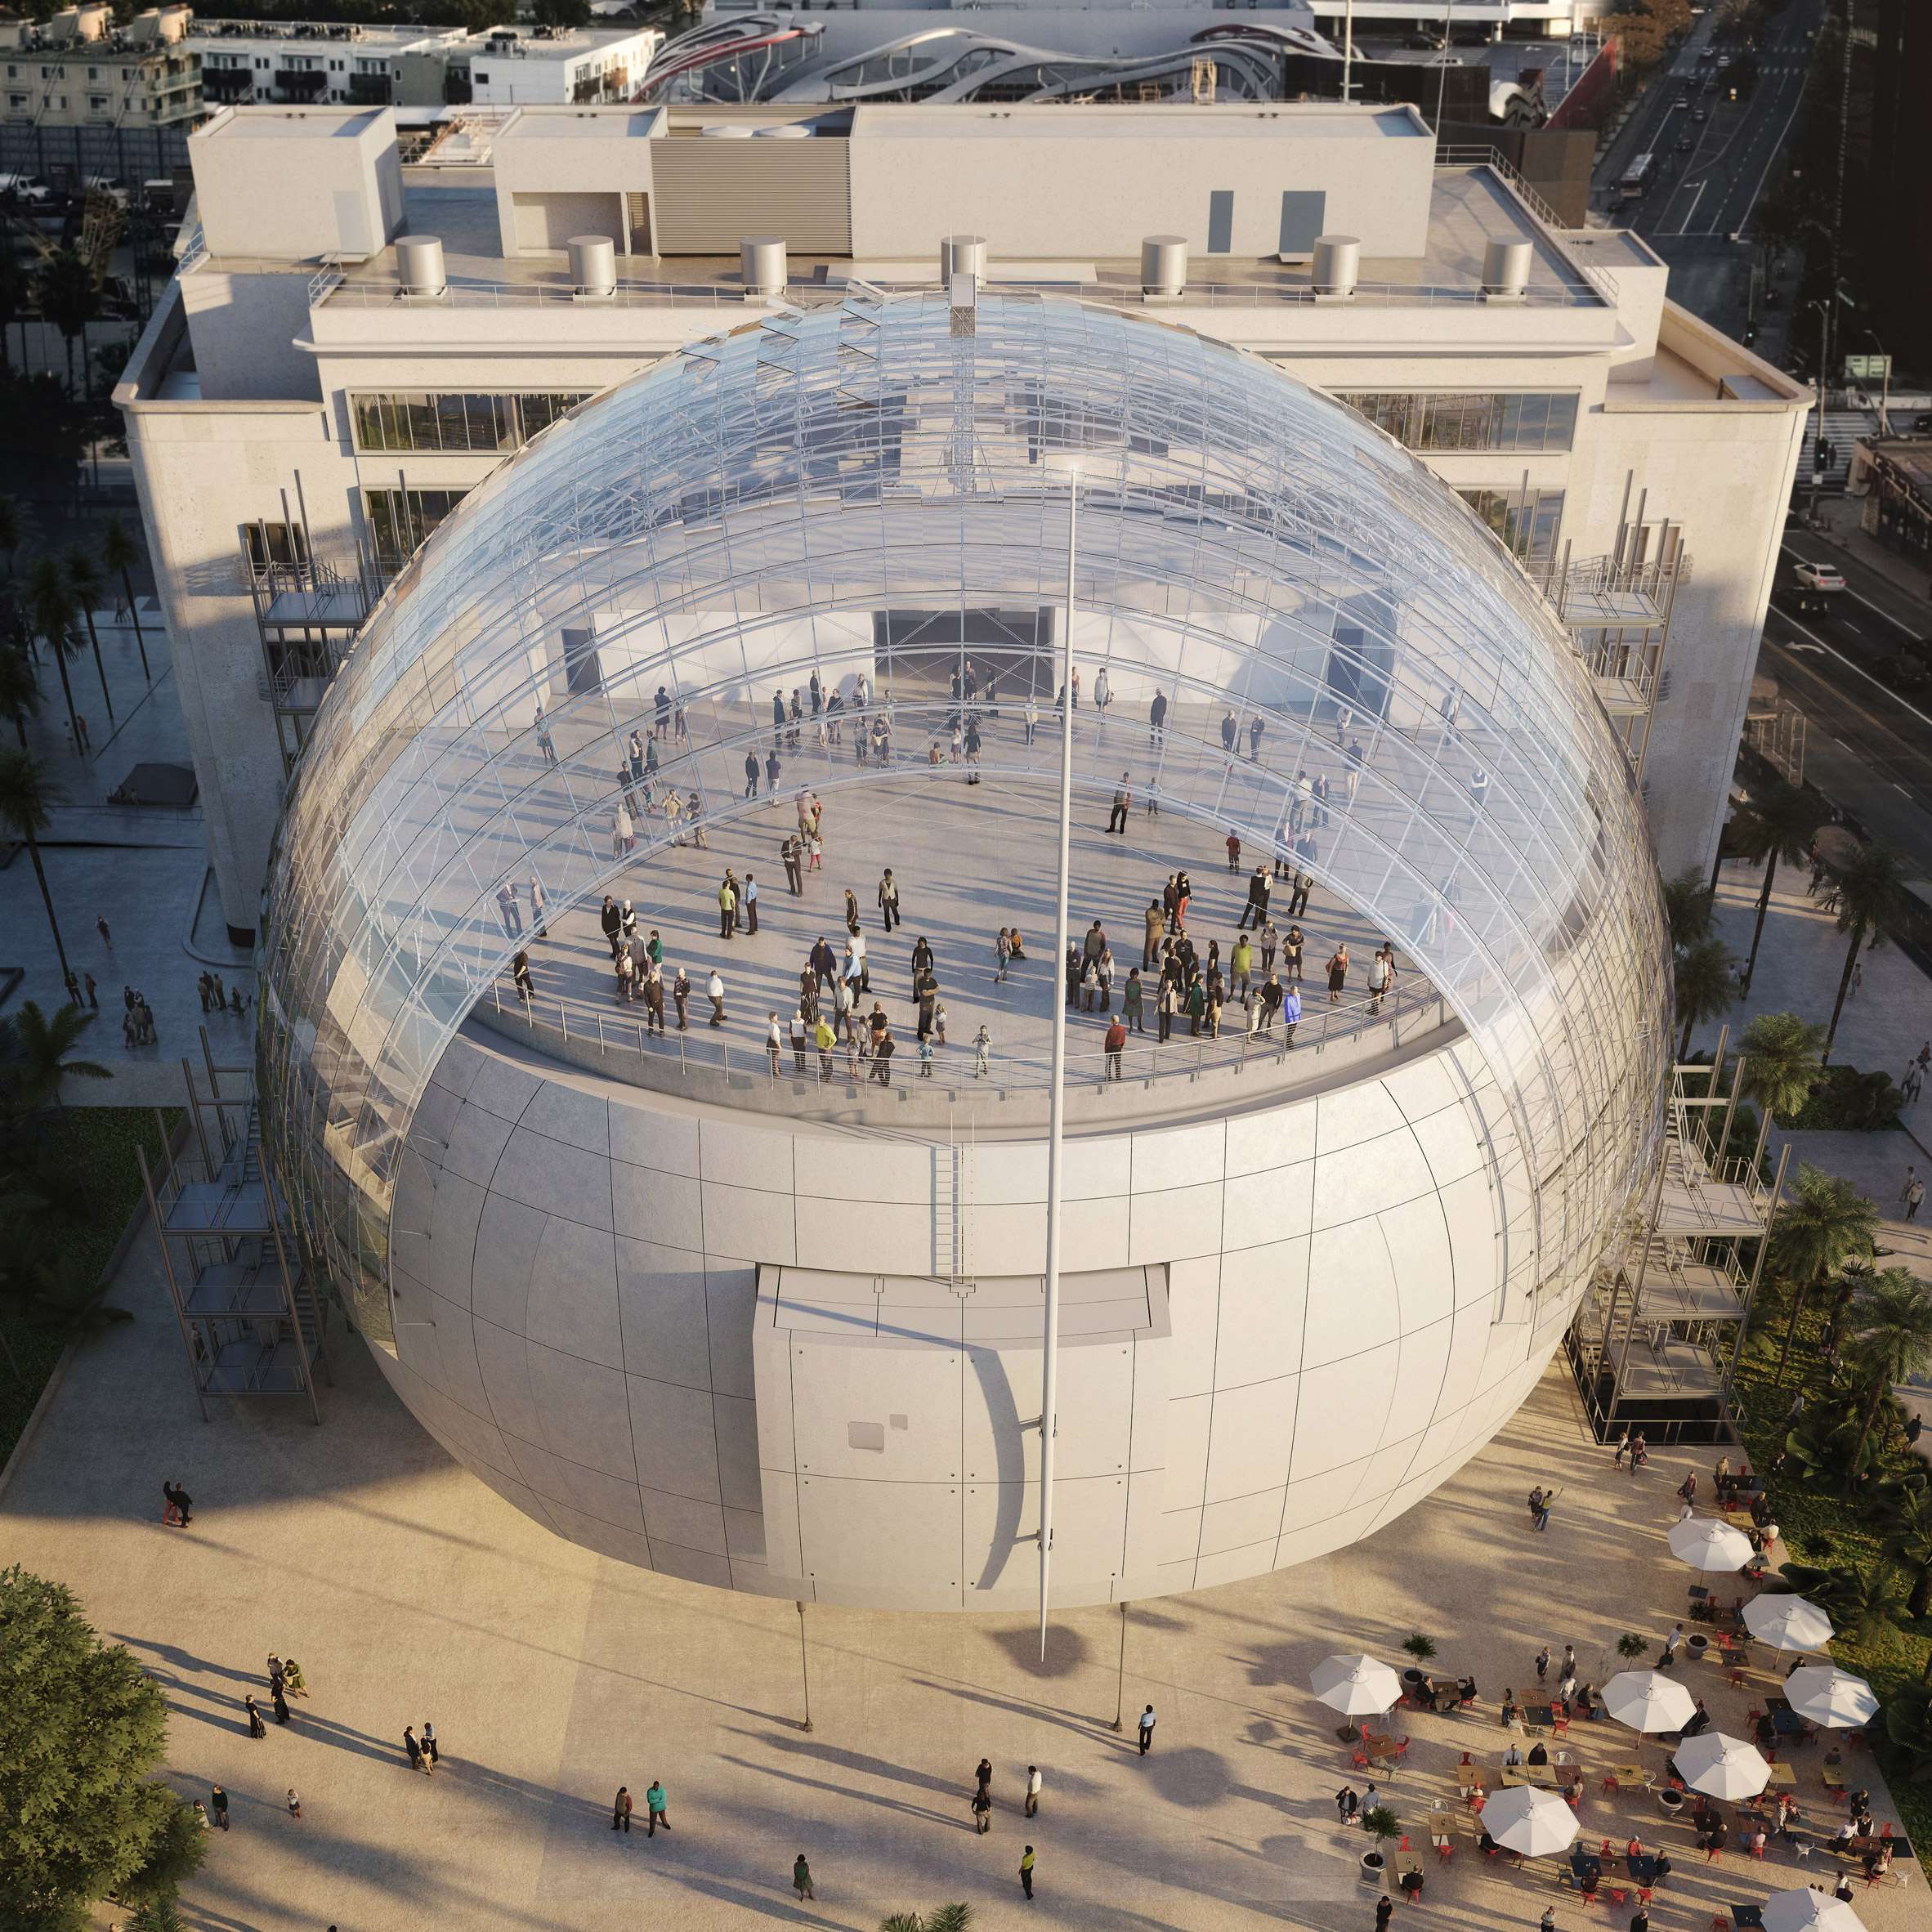 New images show Renzo Piano